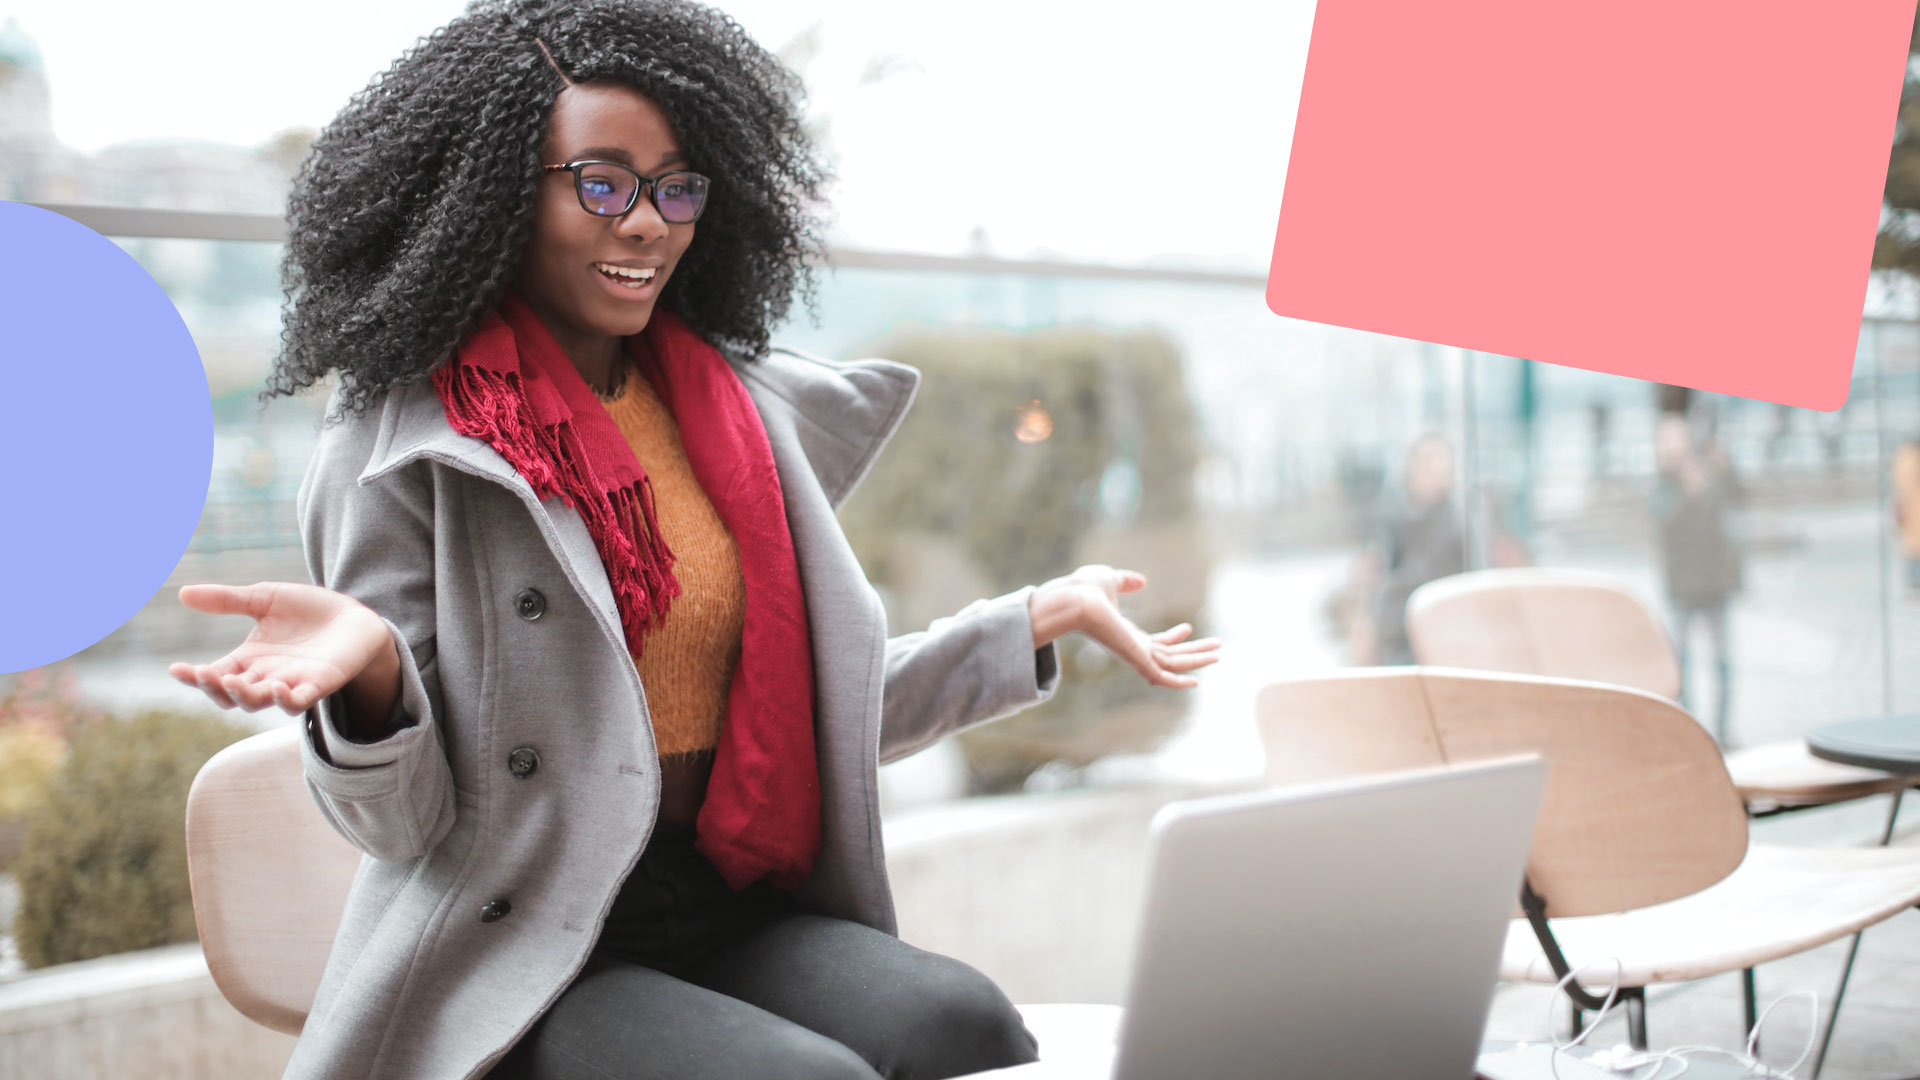 A cheerful woman wearing a scarf and coat is sitting outside. In front of her is an open laptop. She is looking surprised because of how good the personalised website experience is.